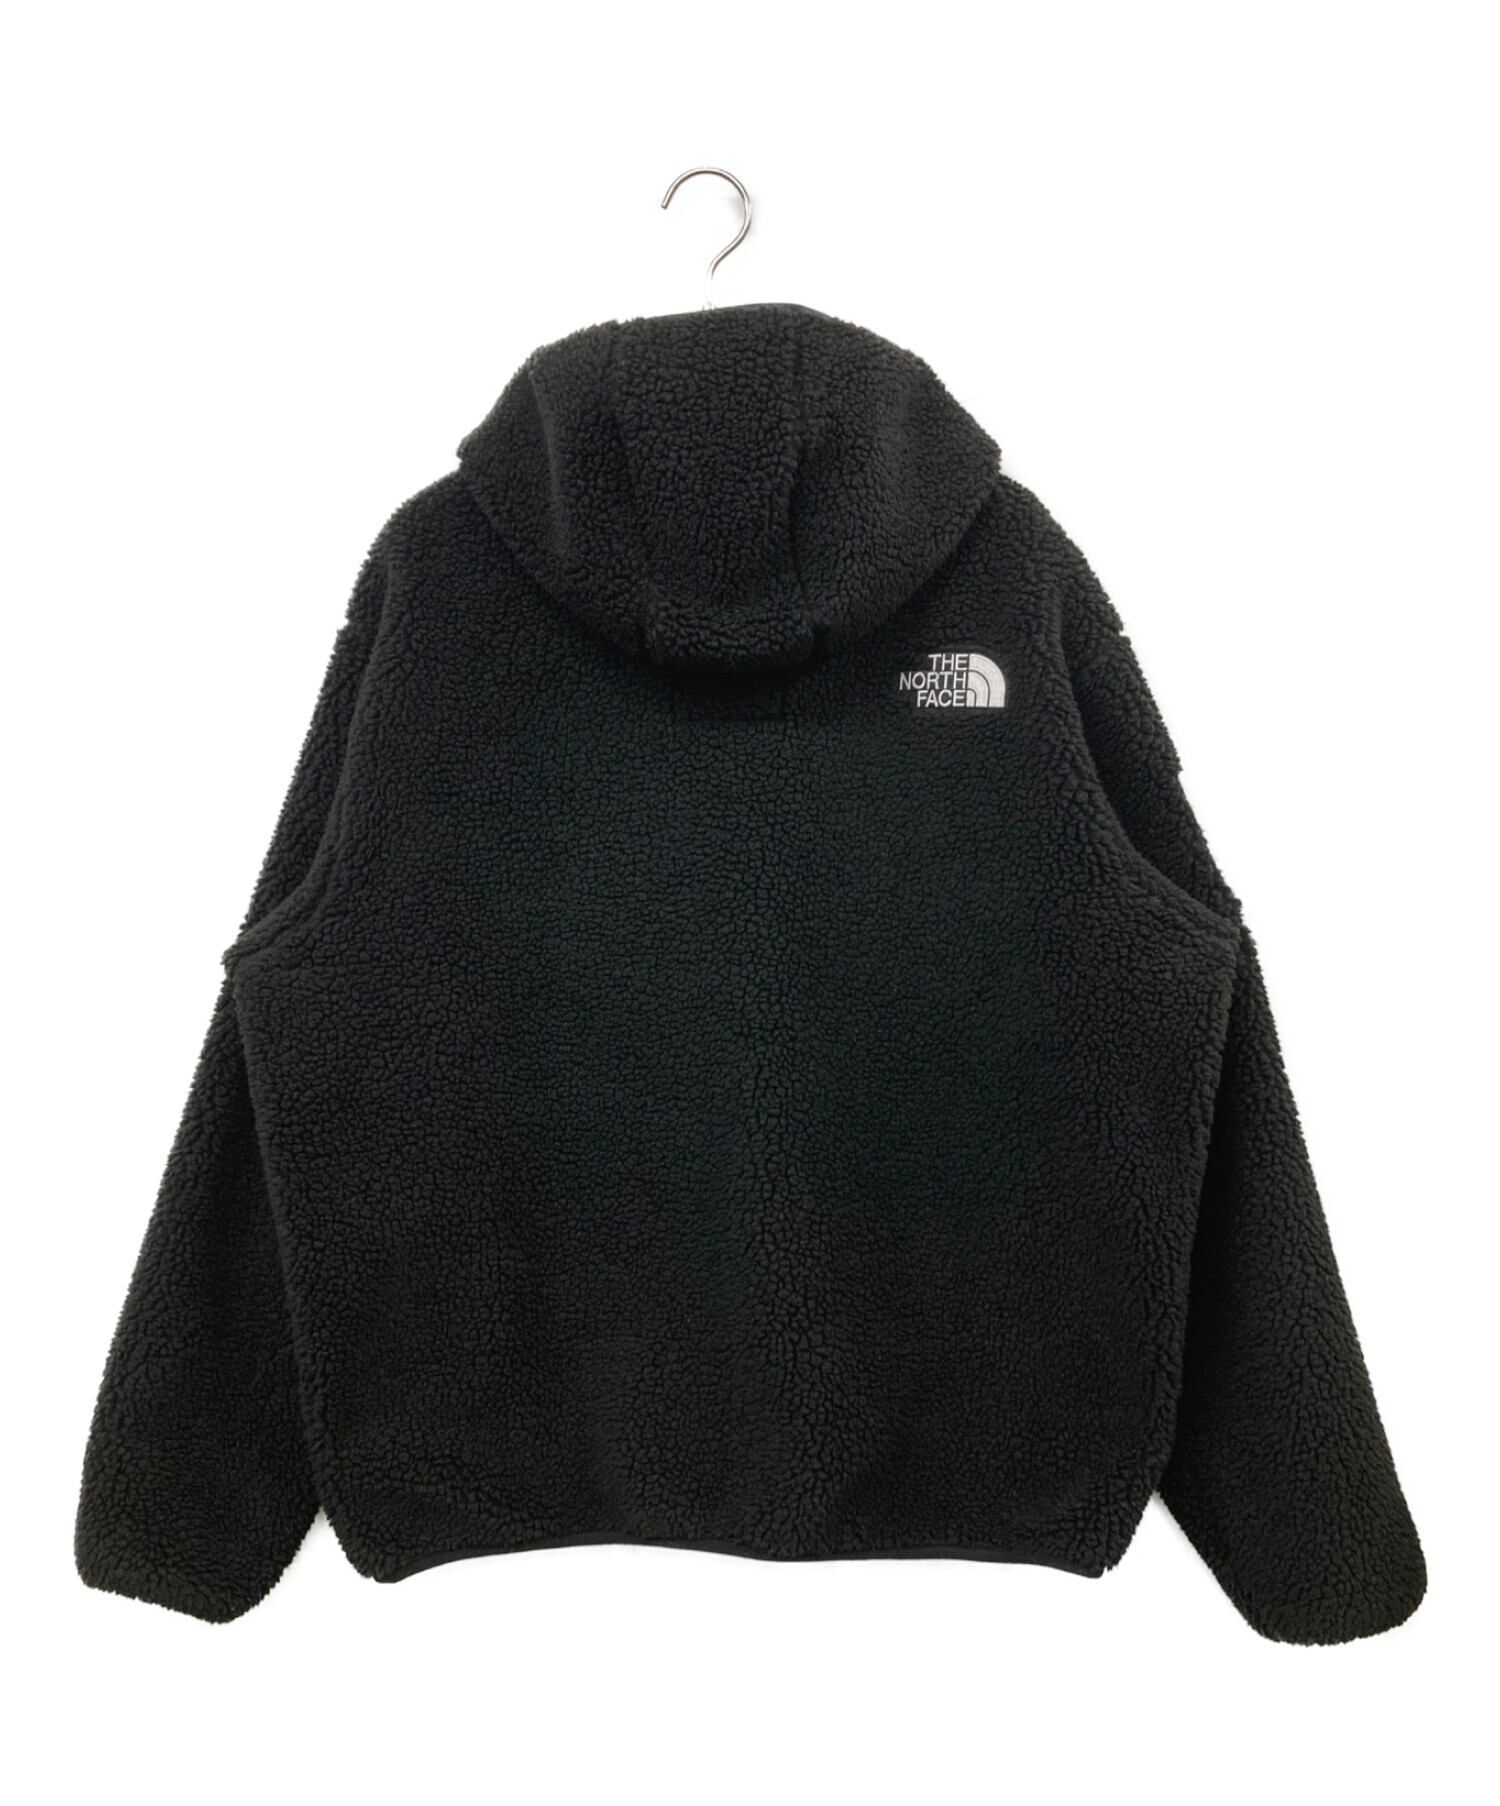 Supreme THE NORTH FACE Fleece Jacket 黒 Lその他